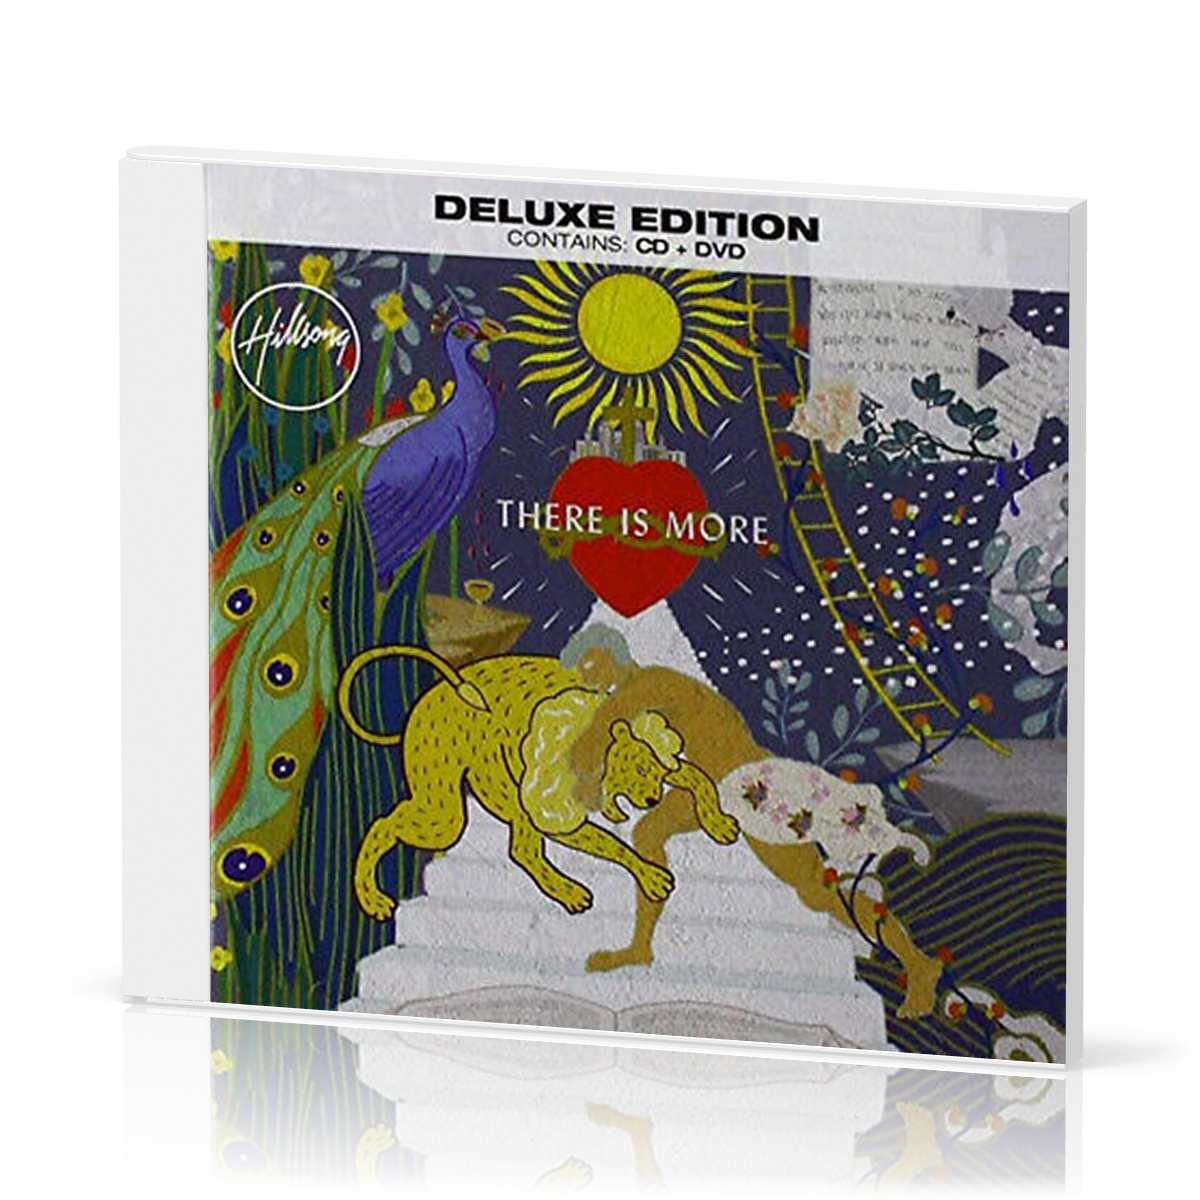 There is more  - Deluxe Edition CD + DVD